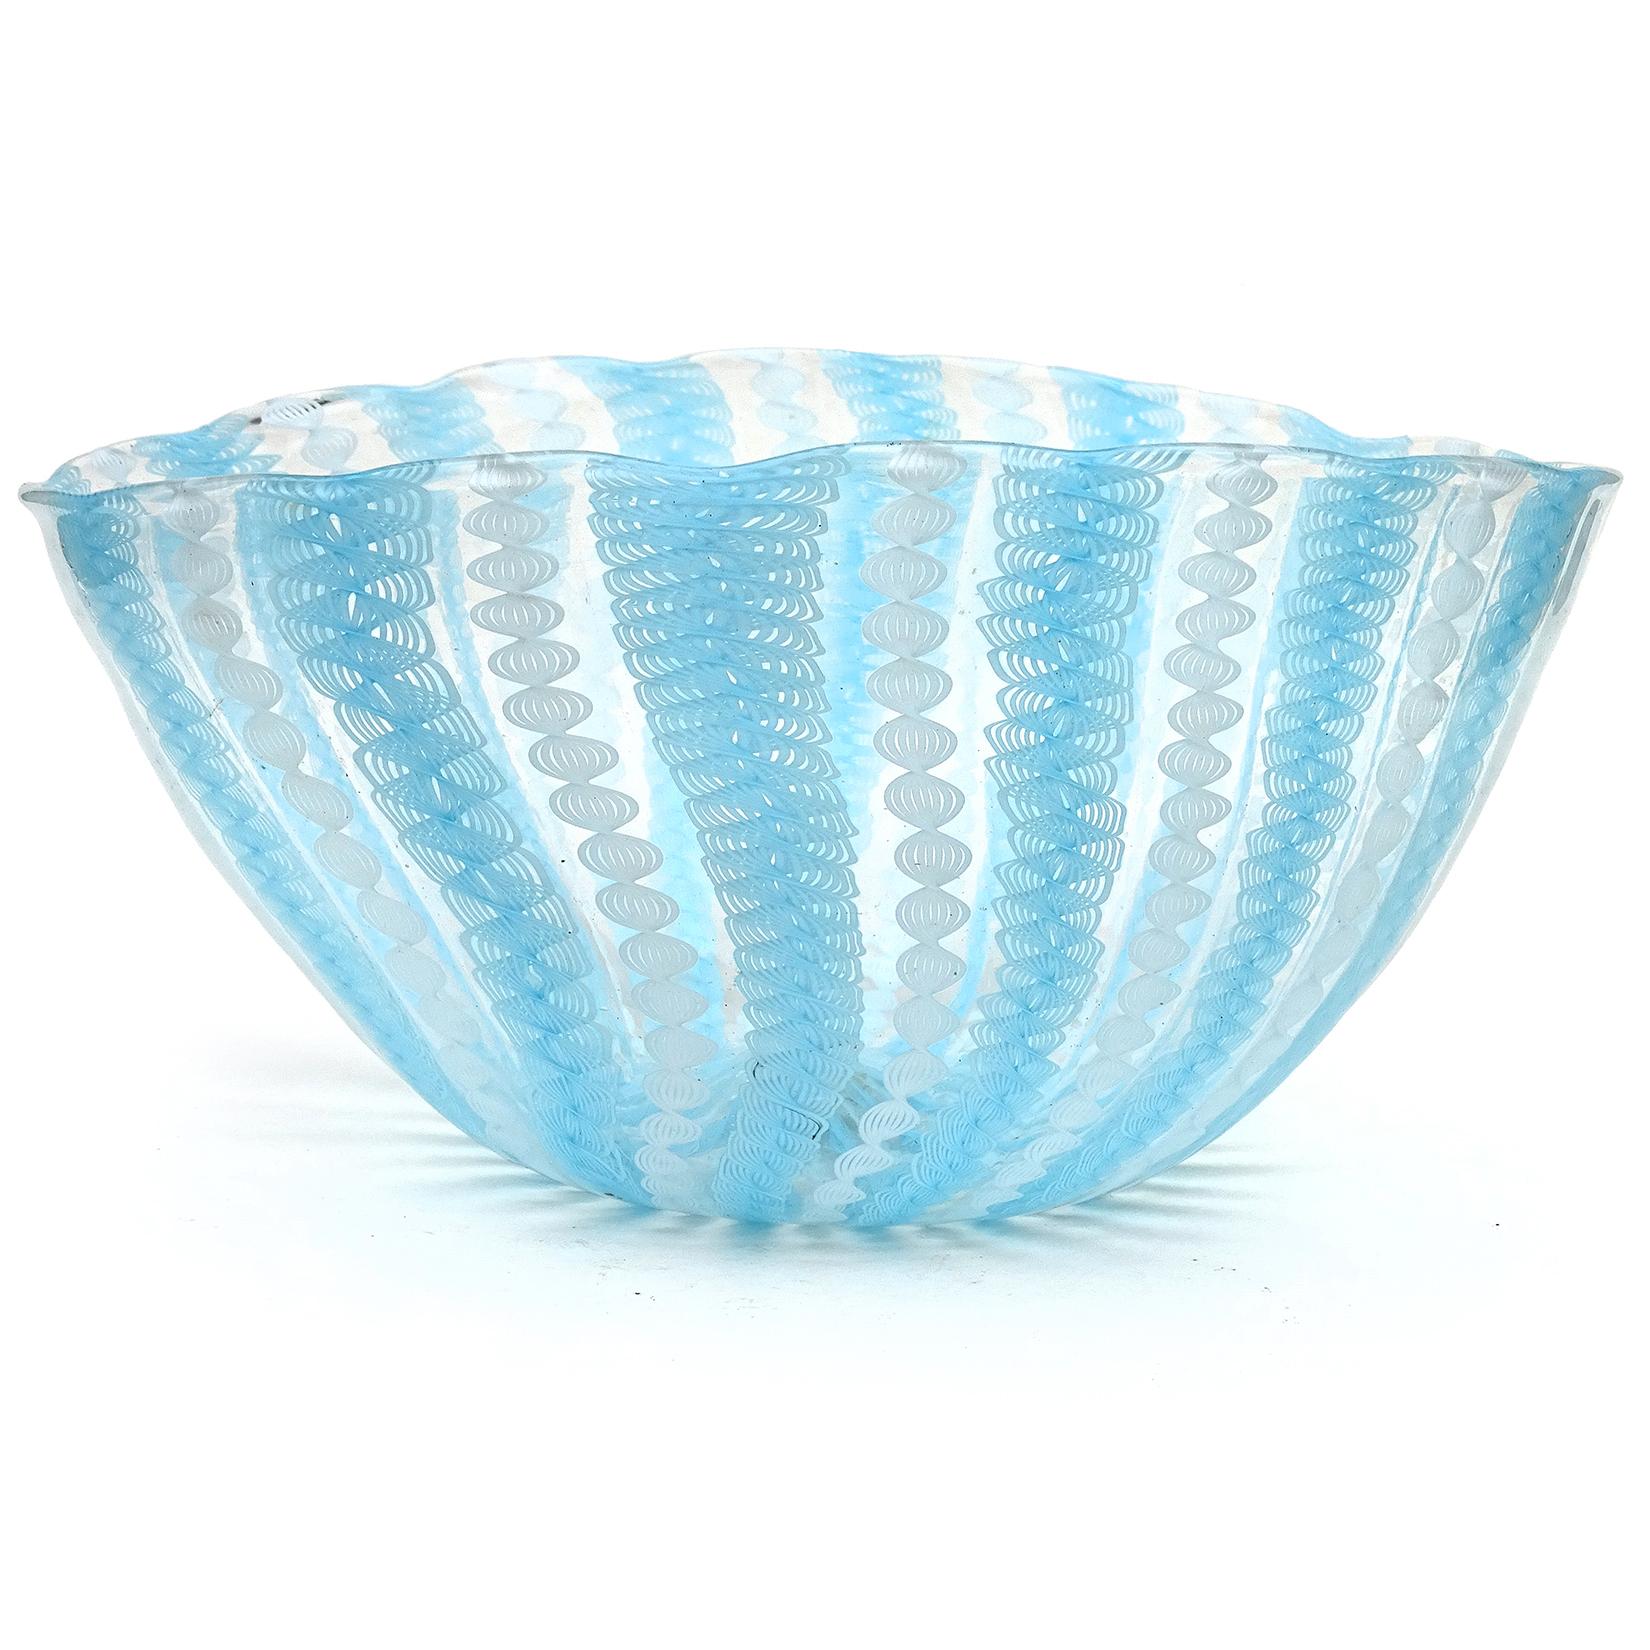 Beautiful large, vintage murano hand blown sky blue and white Zanfirico ribbons Italian art glass centerpiece bowl. Attributed to the Fratelli Toso company. The bowl still has a blue and silver 